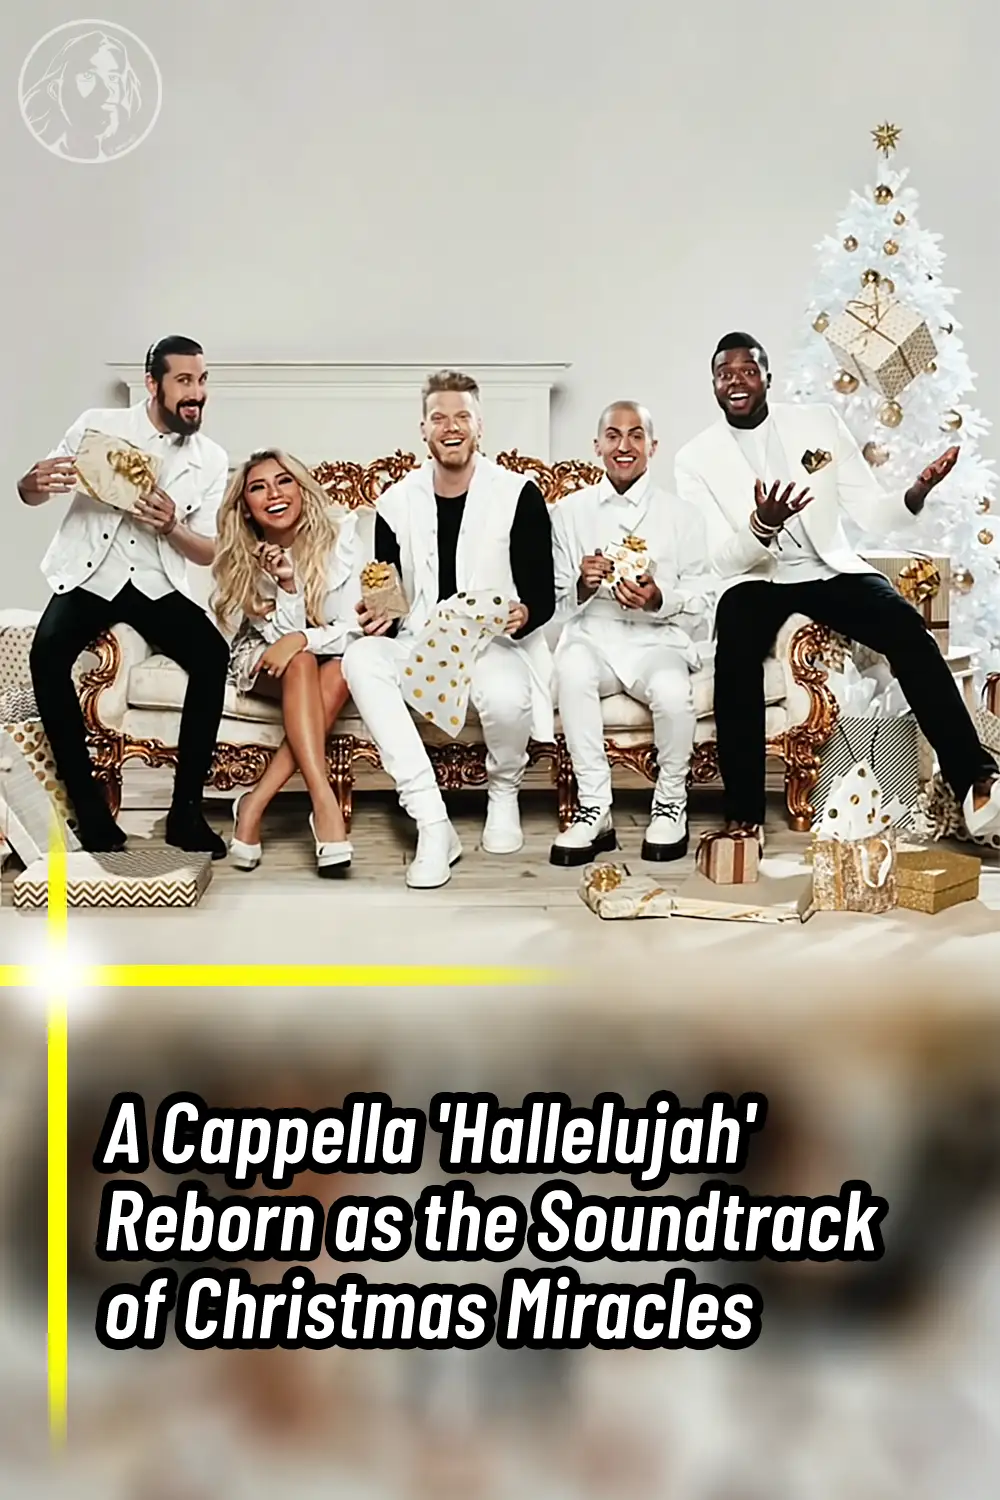 A Cappella \'Hallelujah\' Reborn as the Soundtrack of Christmas Miracles